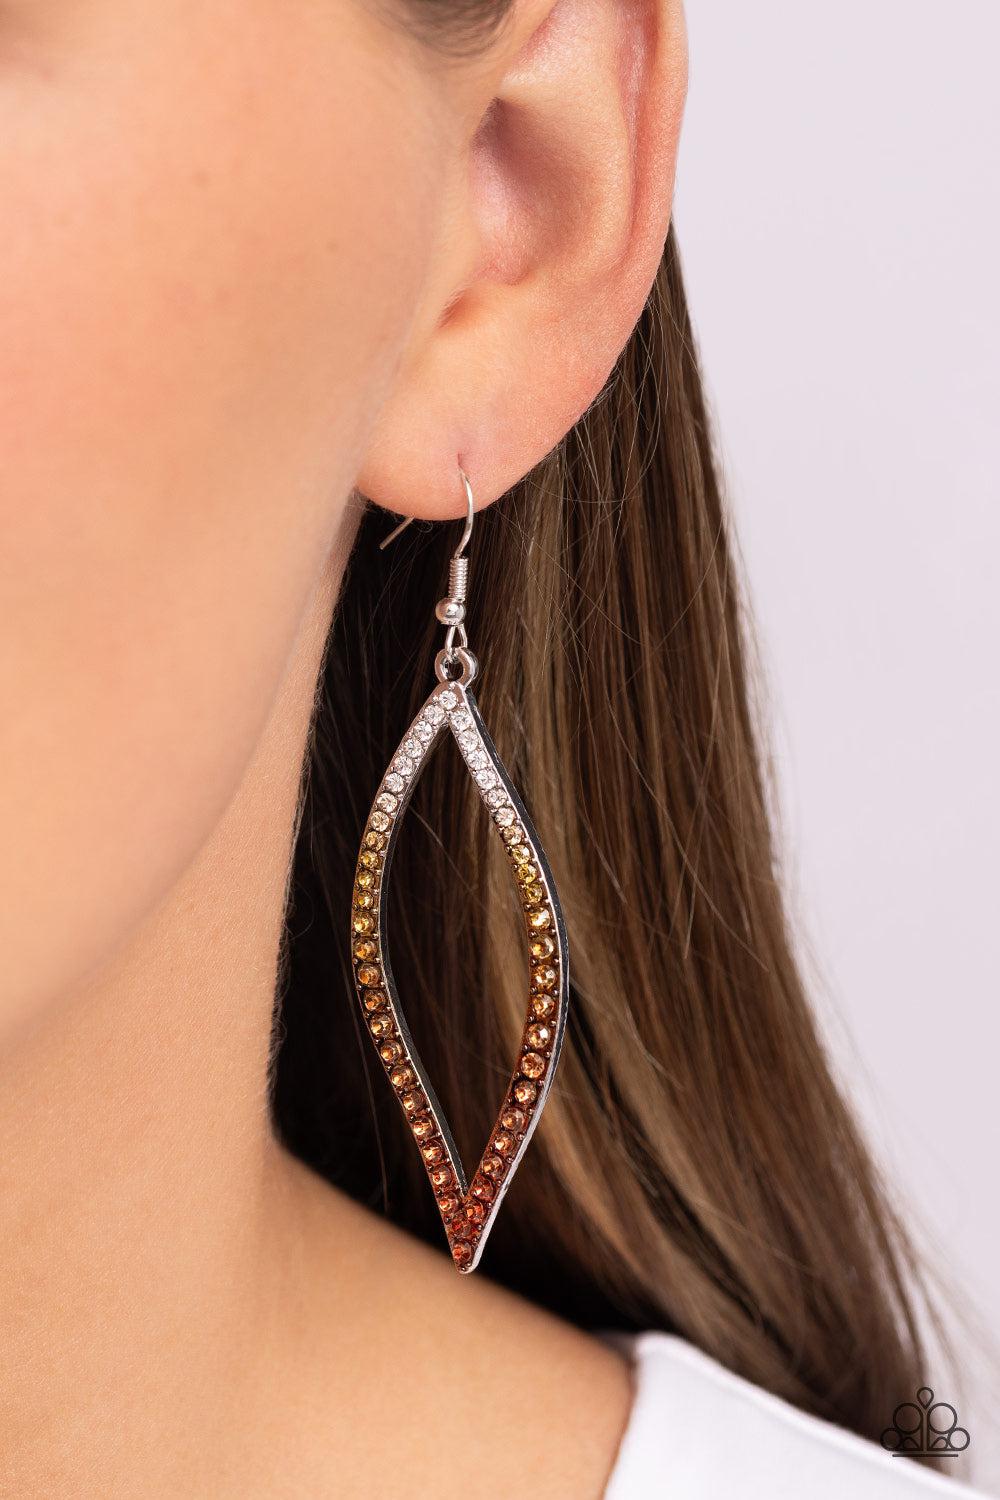 Admirable Asymmetry Multi White &amp; Copper Ombre Earrings - Paparazzi Accessories-on model - CarasShop.com - $5 Jewelry by Cara Jewels